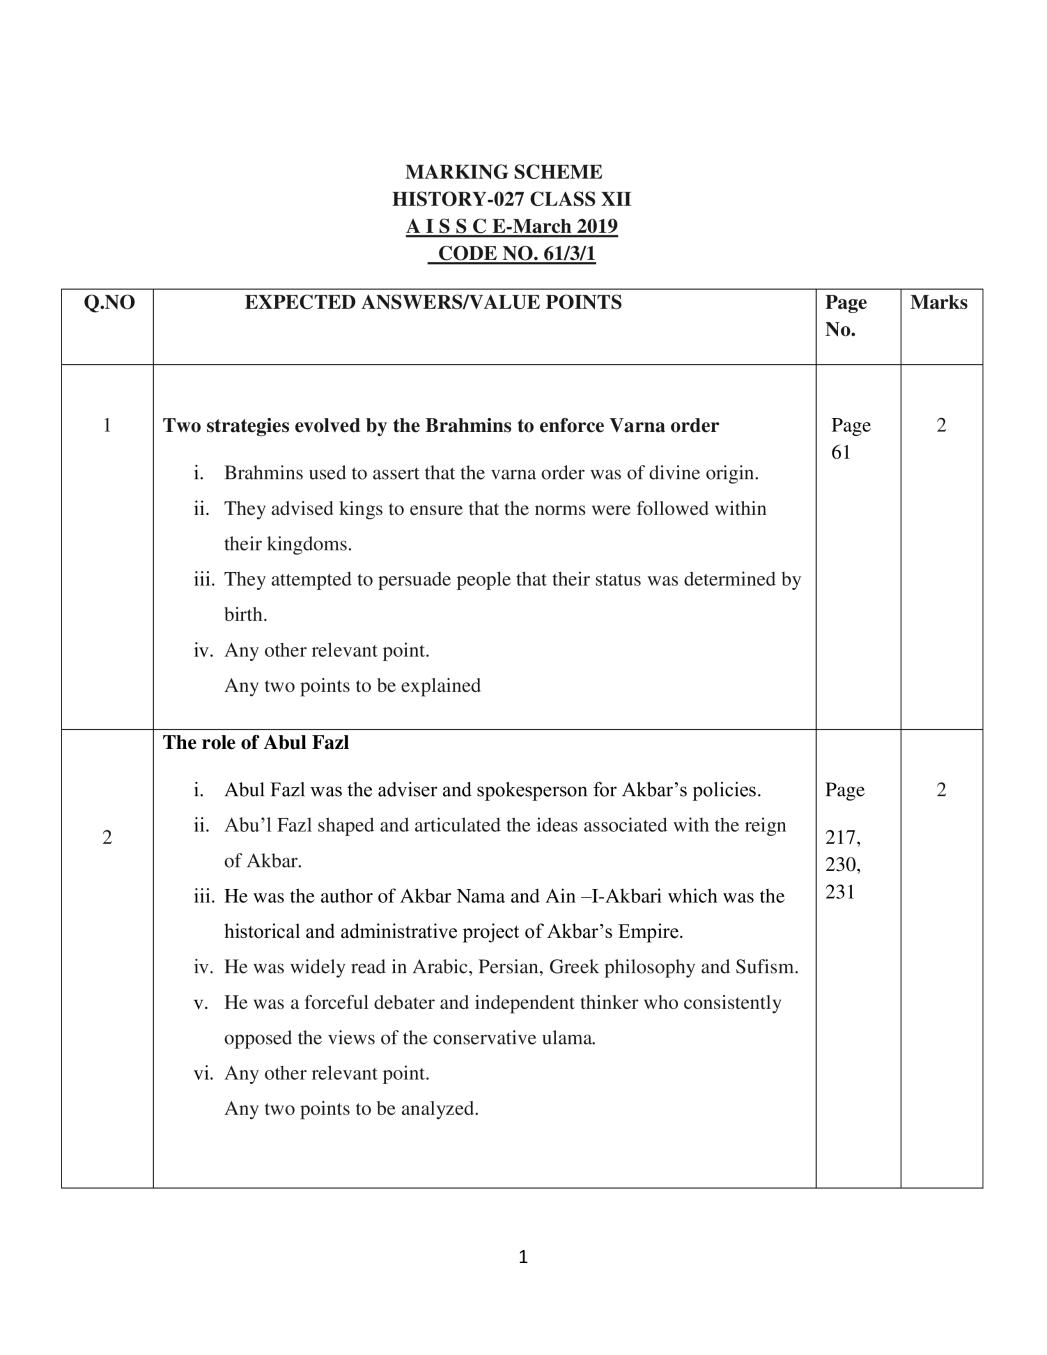 CBSE Class 12 History Question Paper 2019 Set 3 Solutions - Page 1